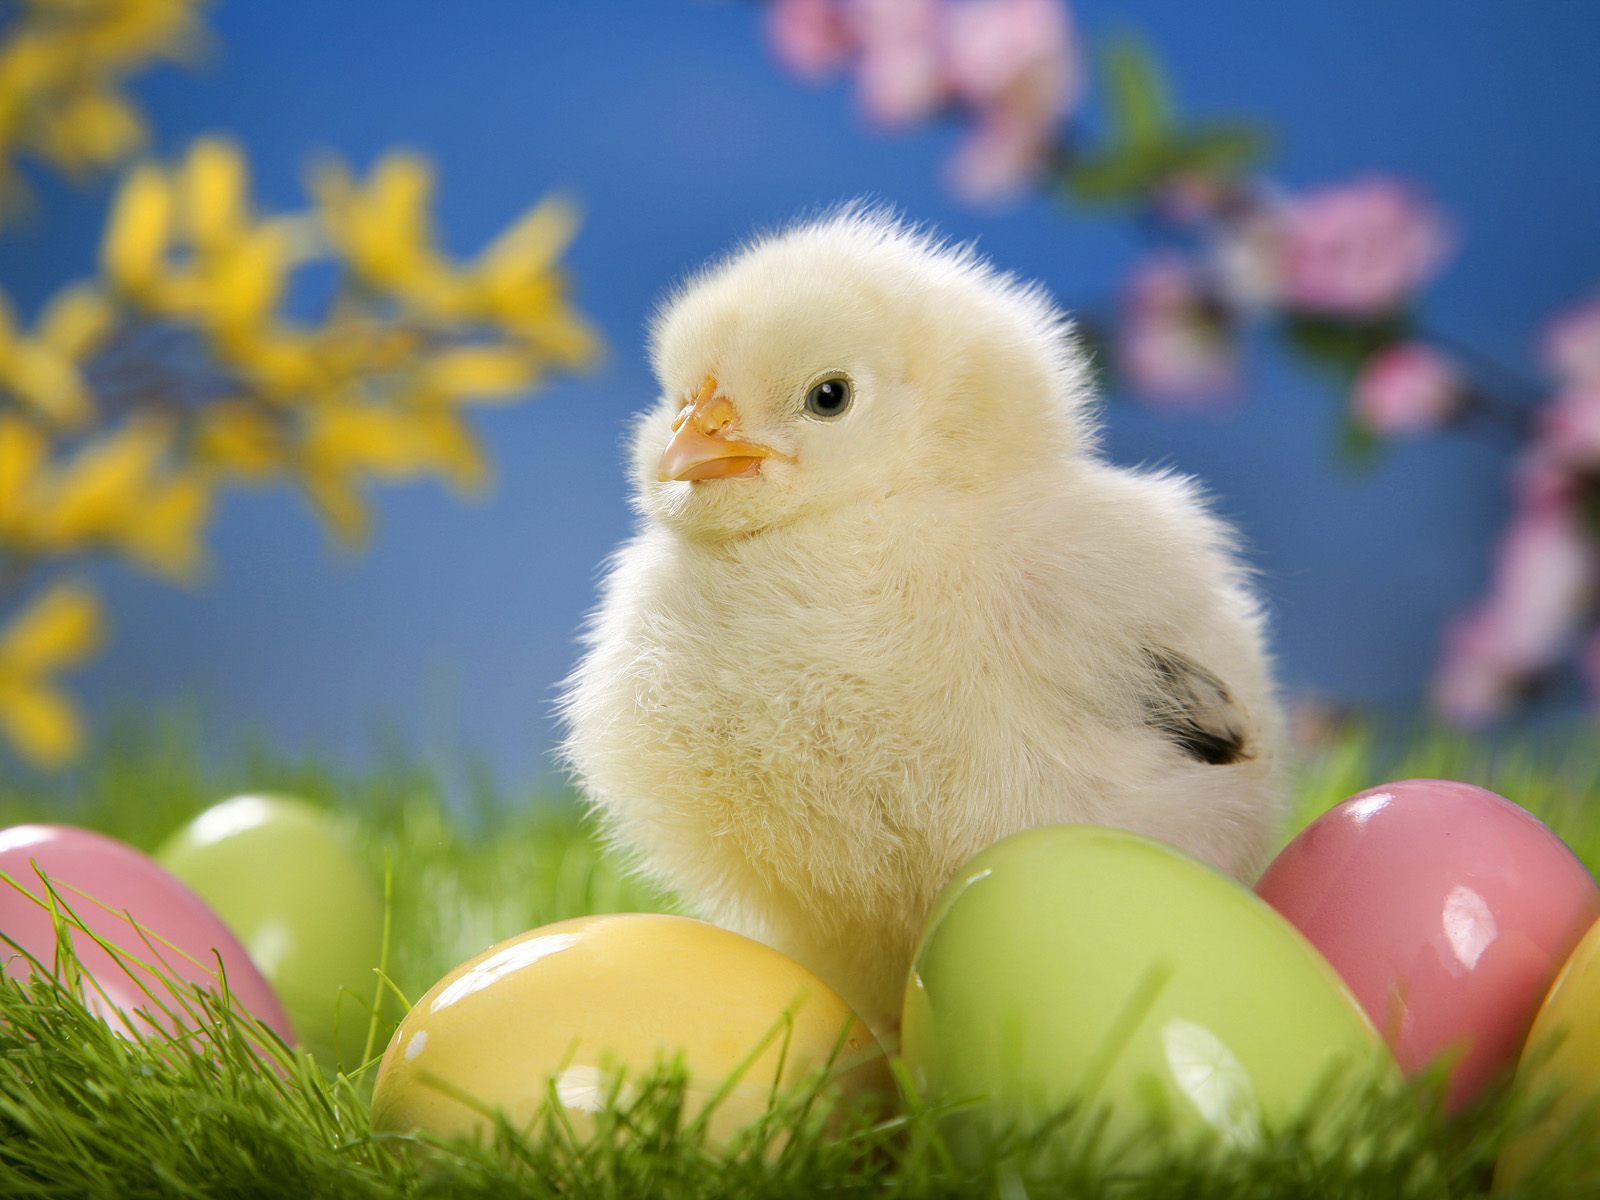 HD wallpaper, Cute, Pictures, Easter